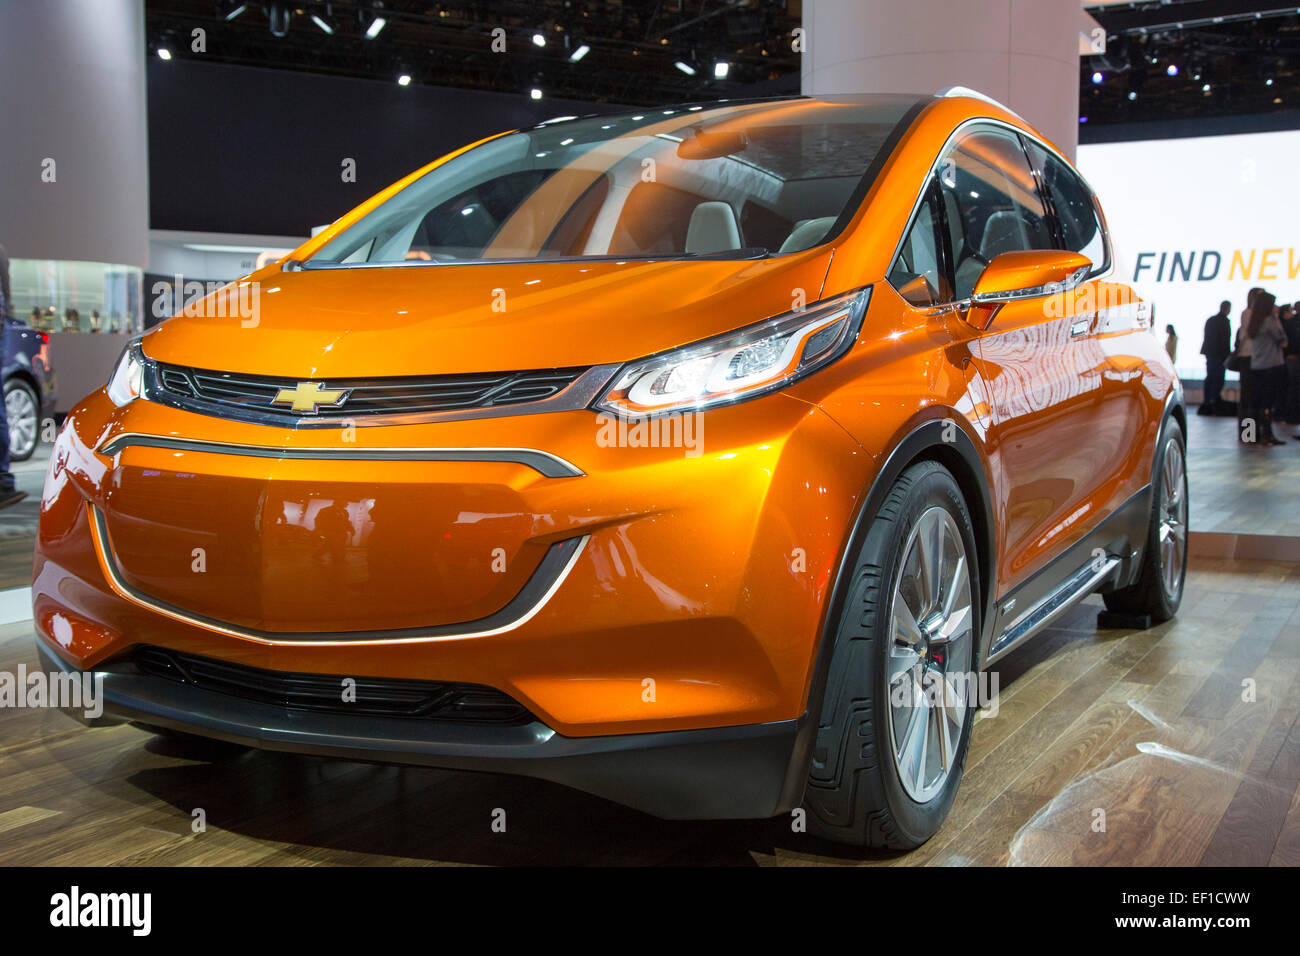 Detroit, Michigan - The Chevrolet Bolt electric vehicle concept car on display at the North American International Auto Show. Stock Photo